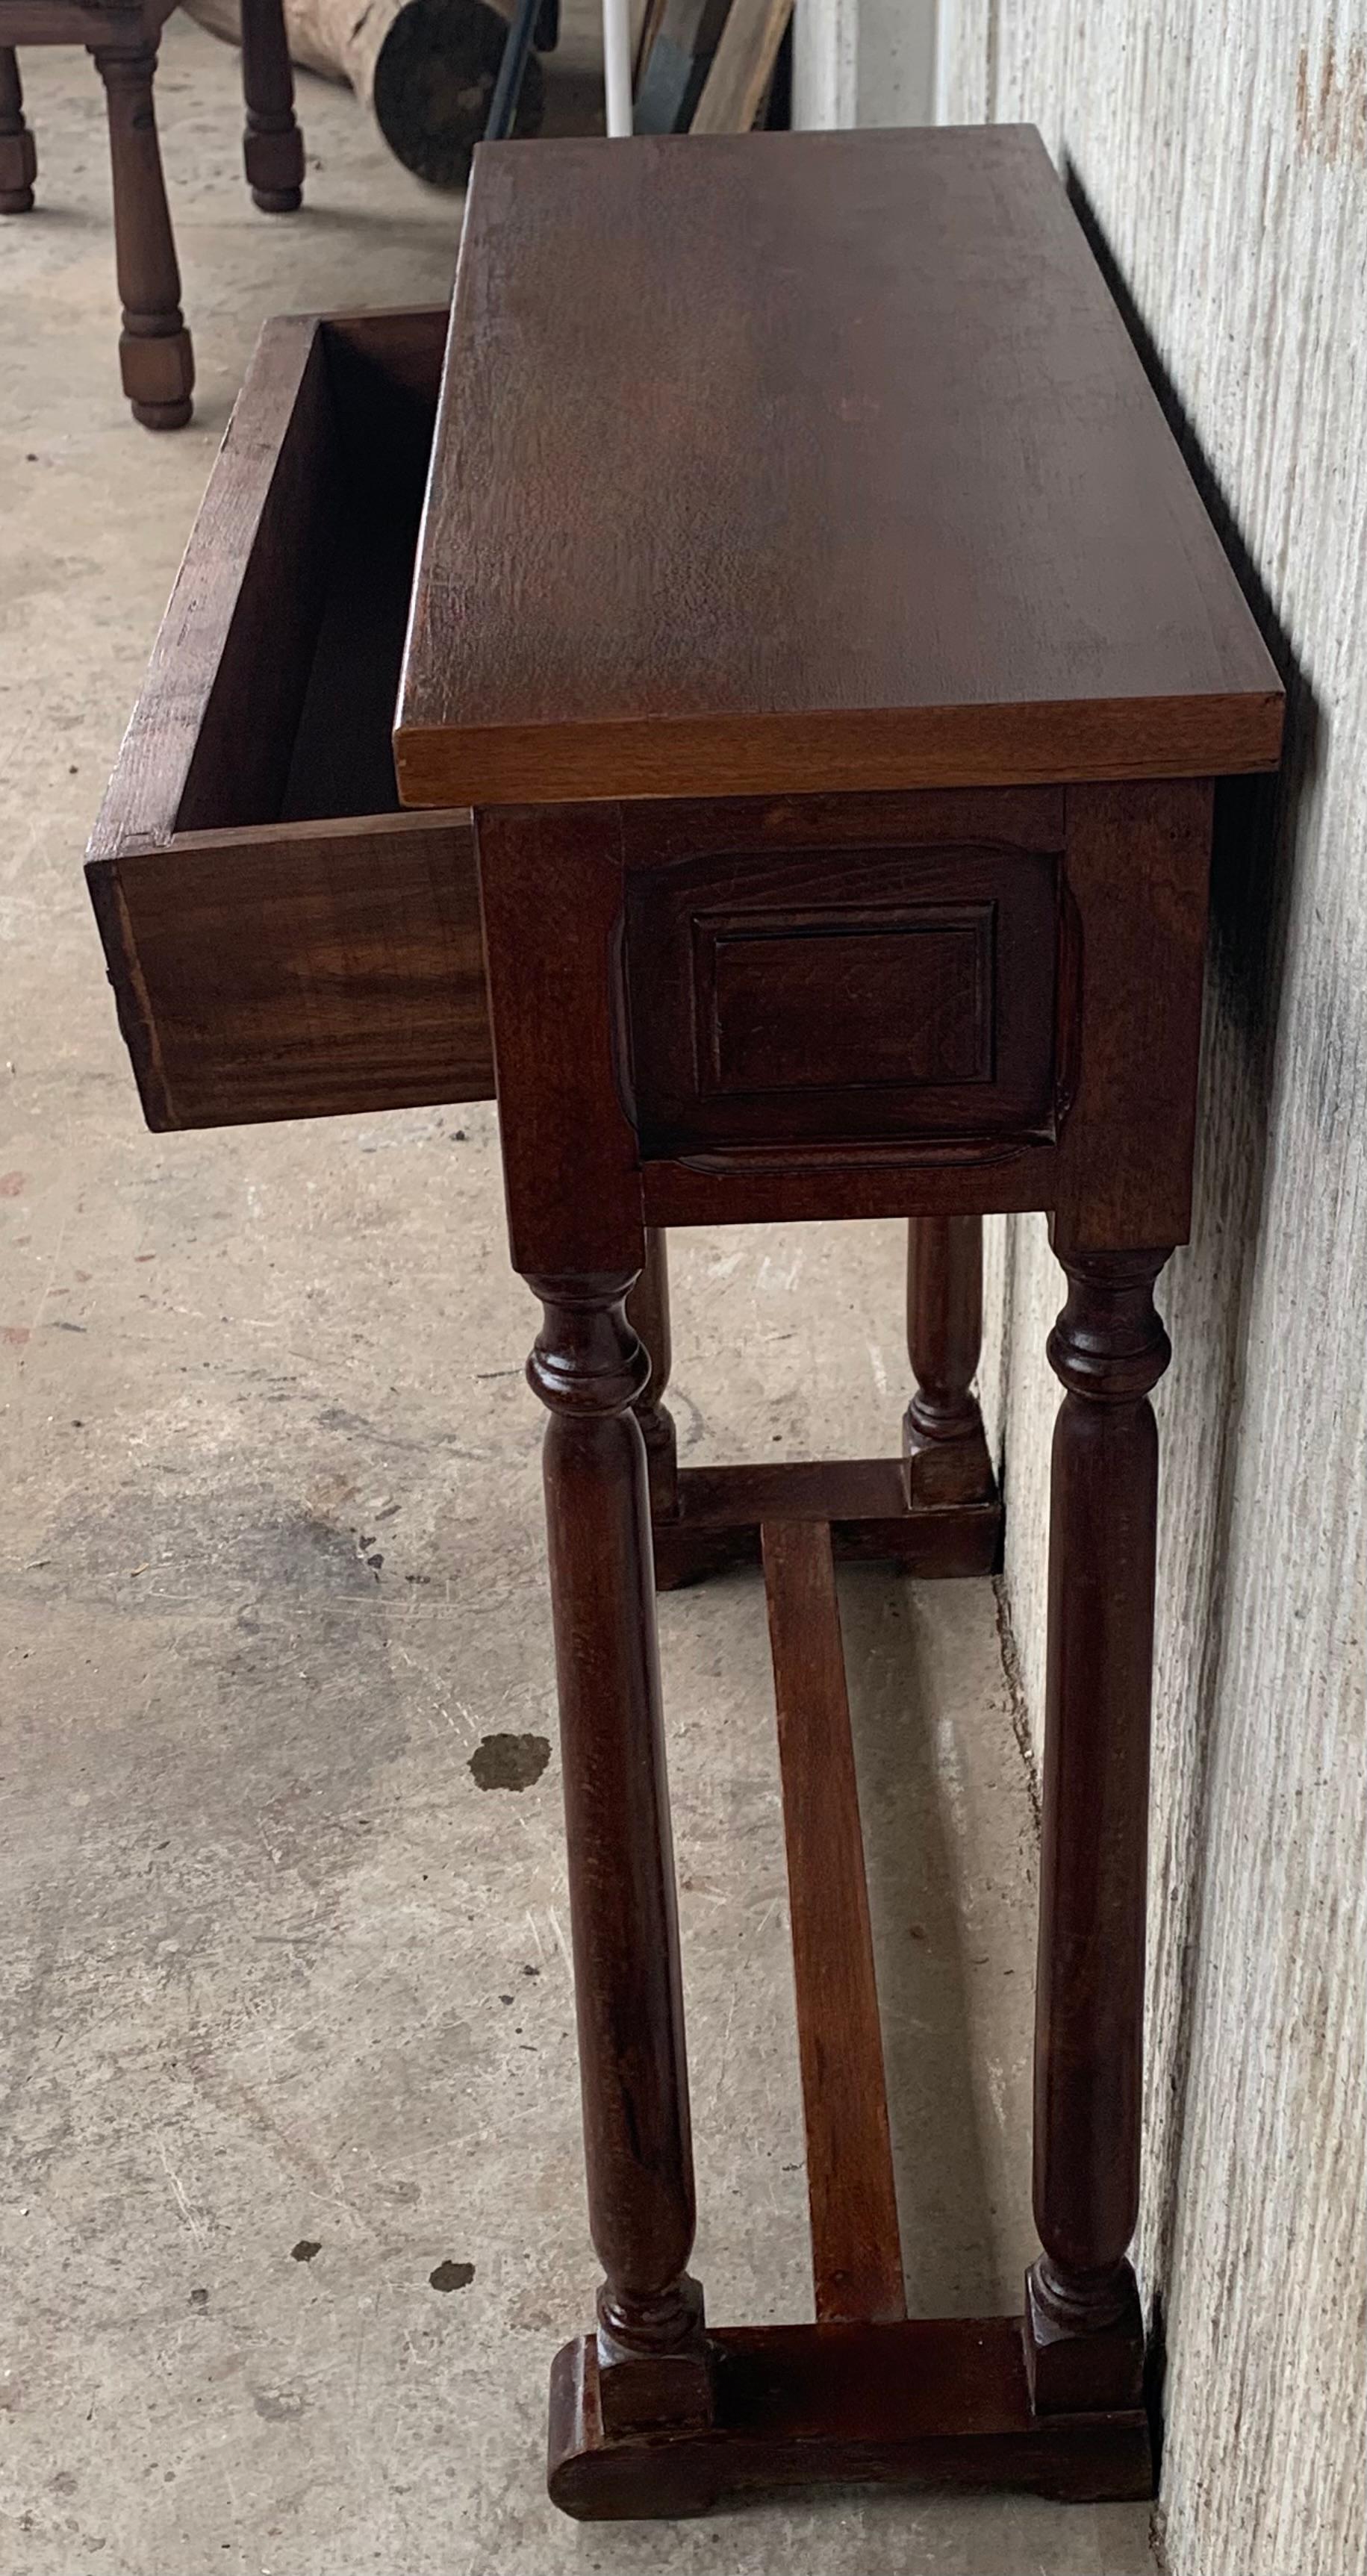 20th Century Spanish Little Console Table with One Drawer and Turned Legs 4